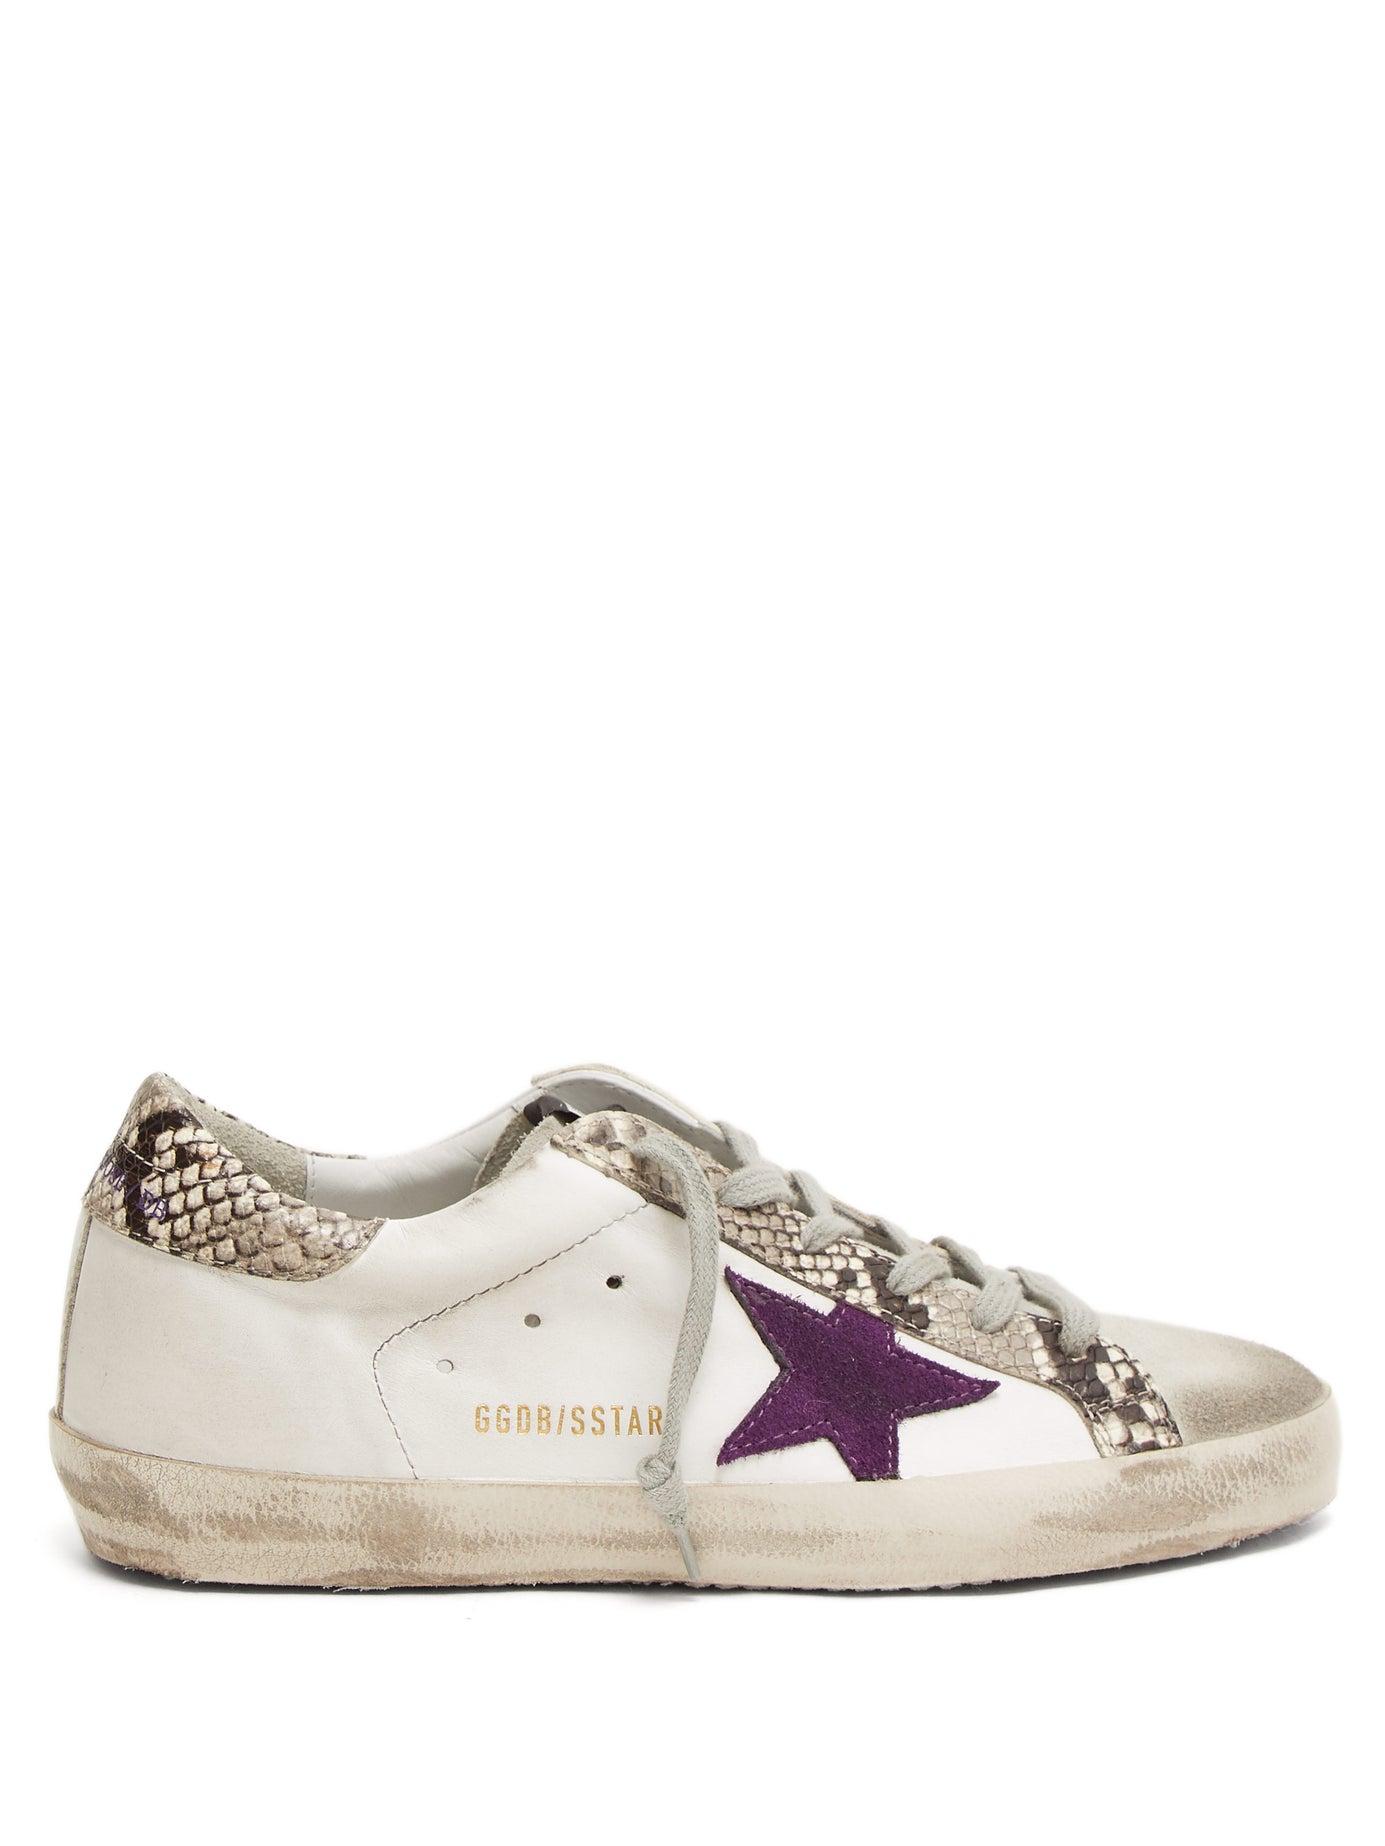 Golden Goose Deluxe Brand Superstar Python-effect Leather Trainers in ...